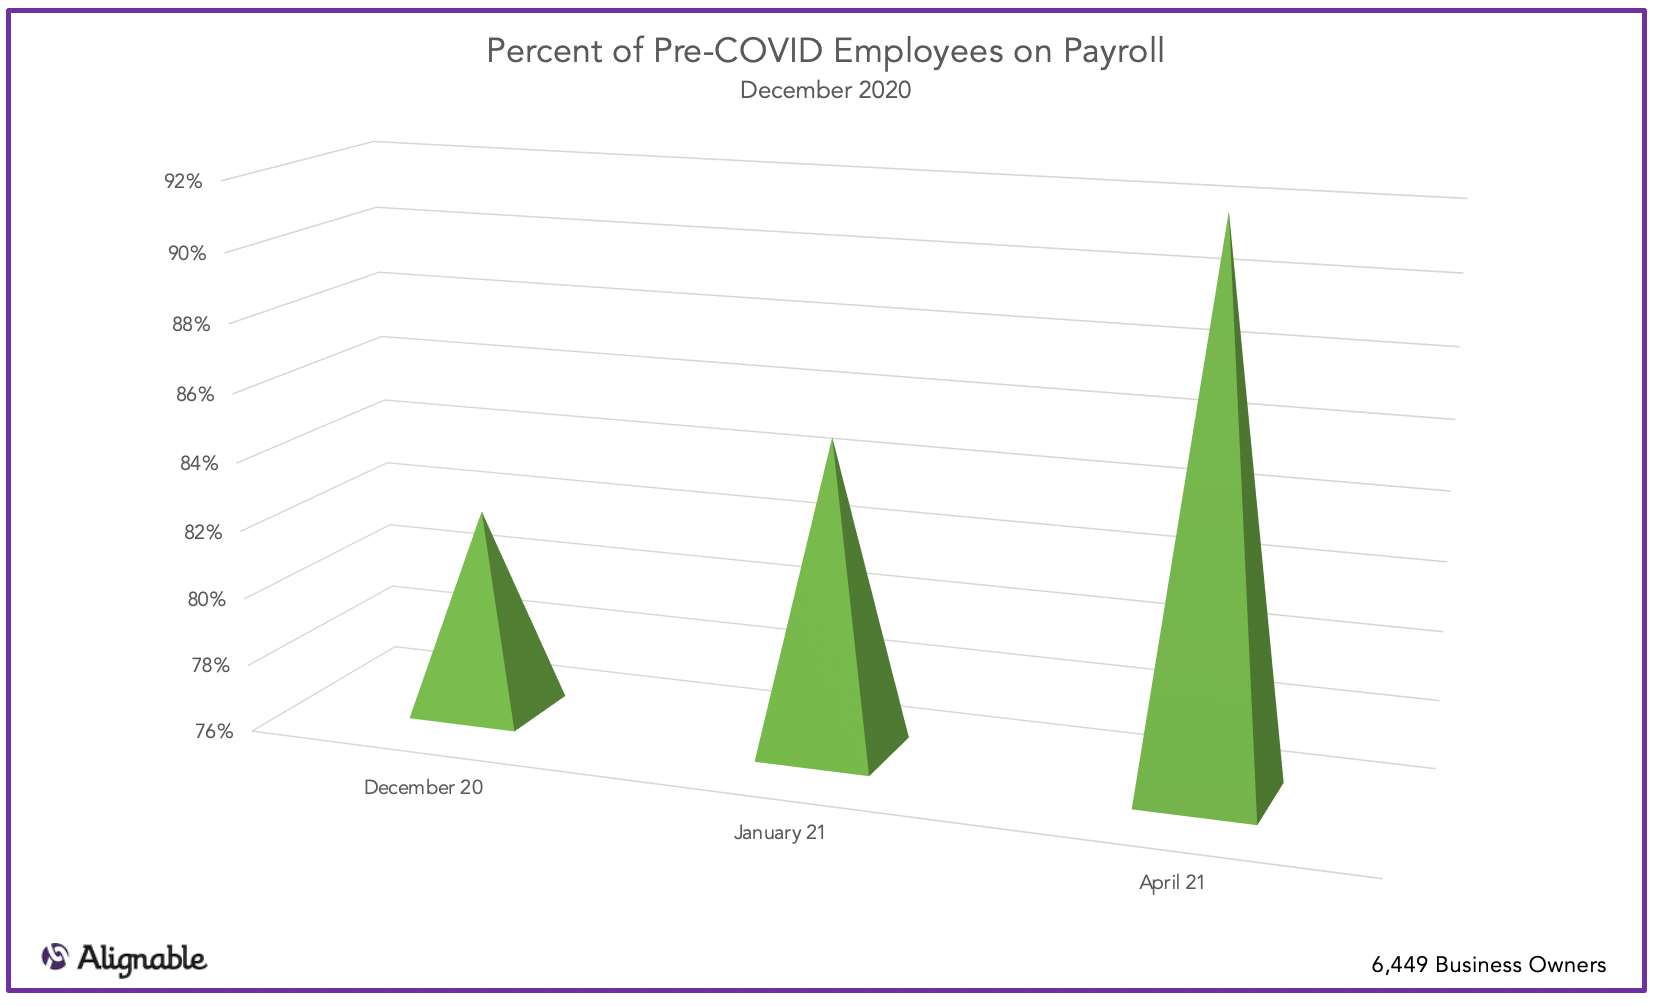 Employees Returning to Pre-Covid Levels over Time